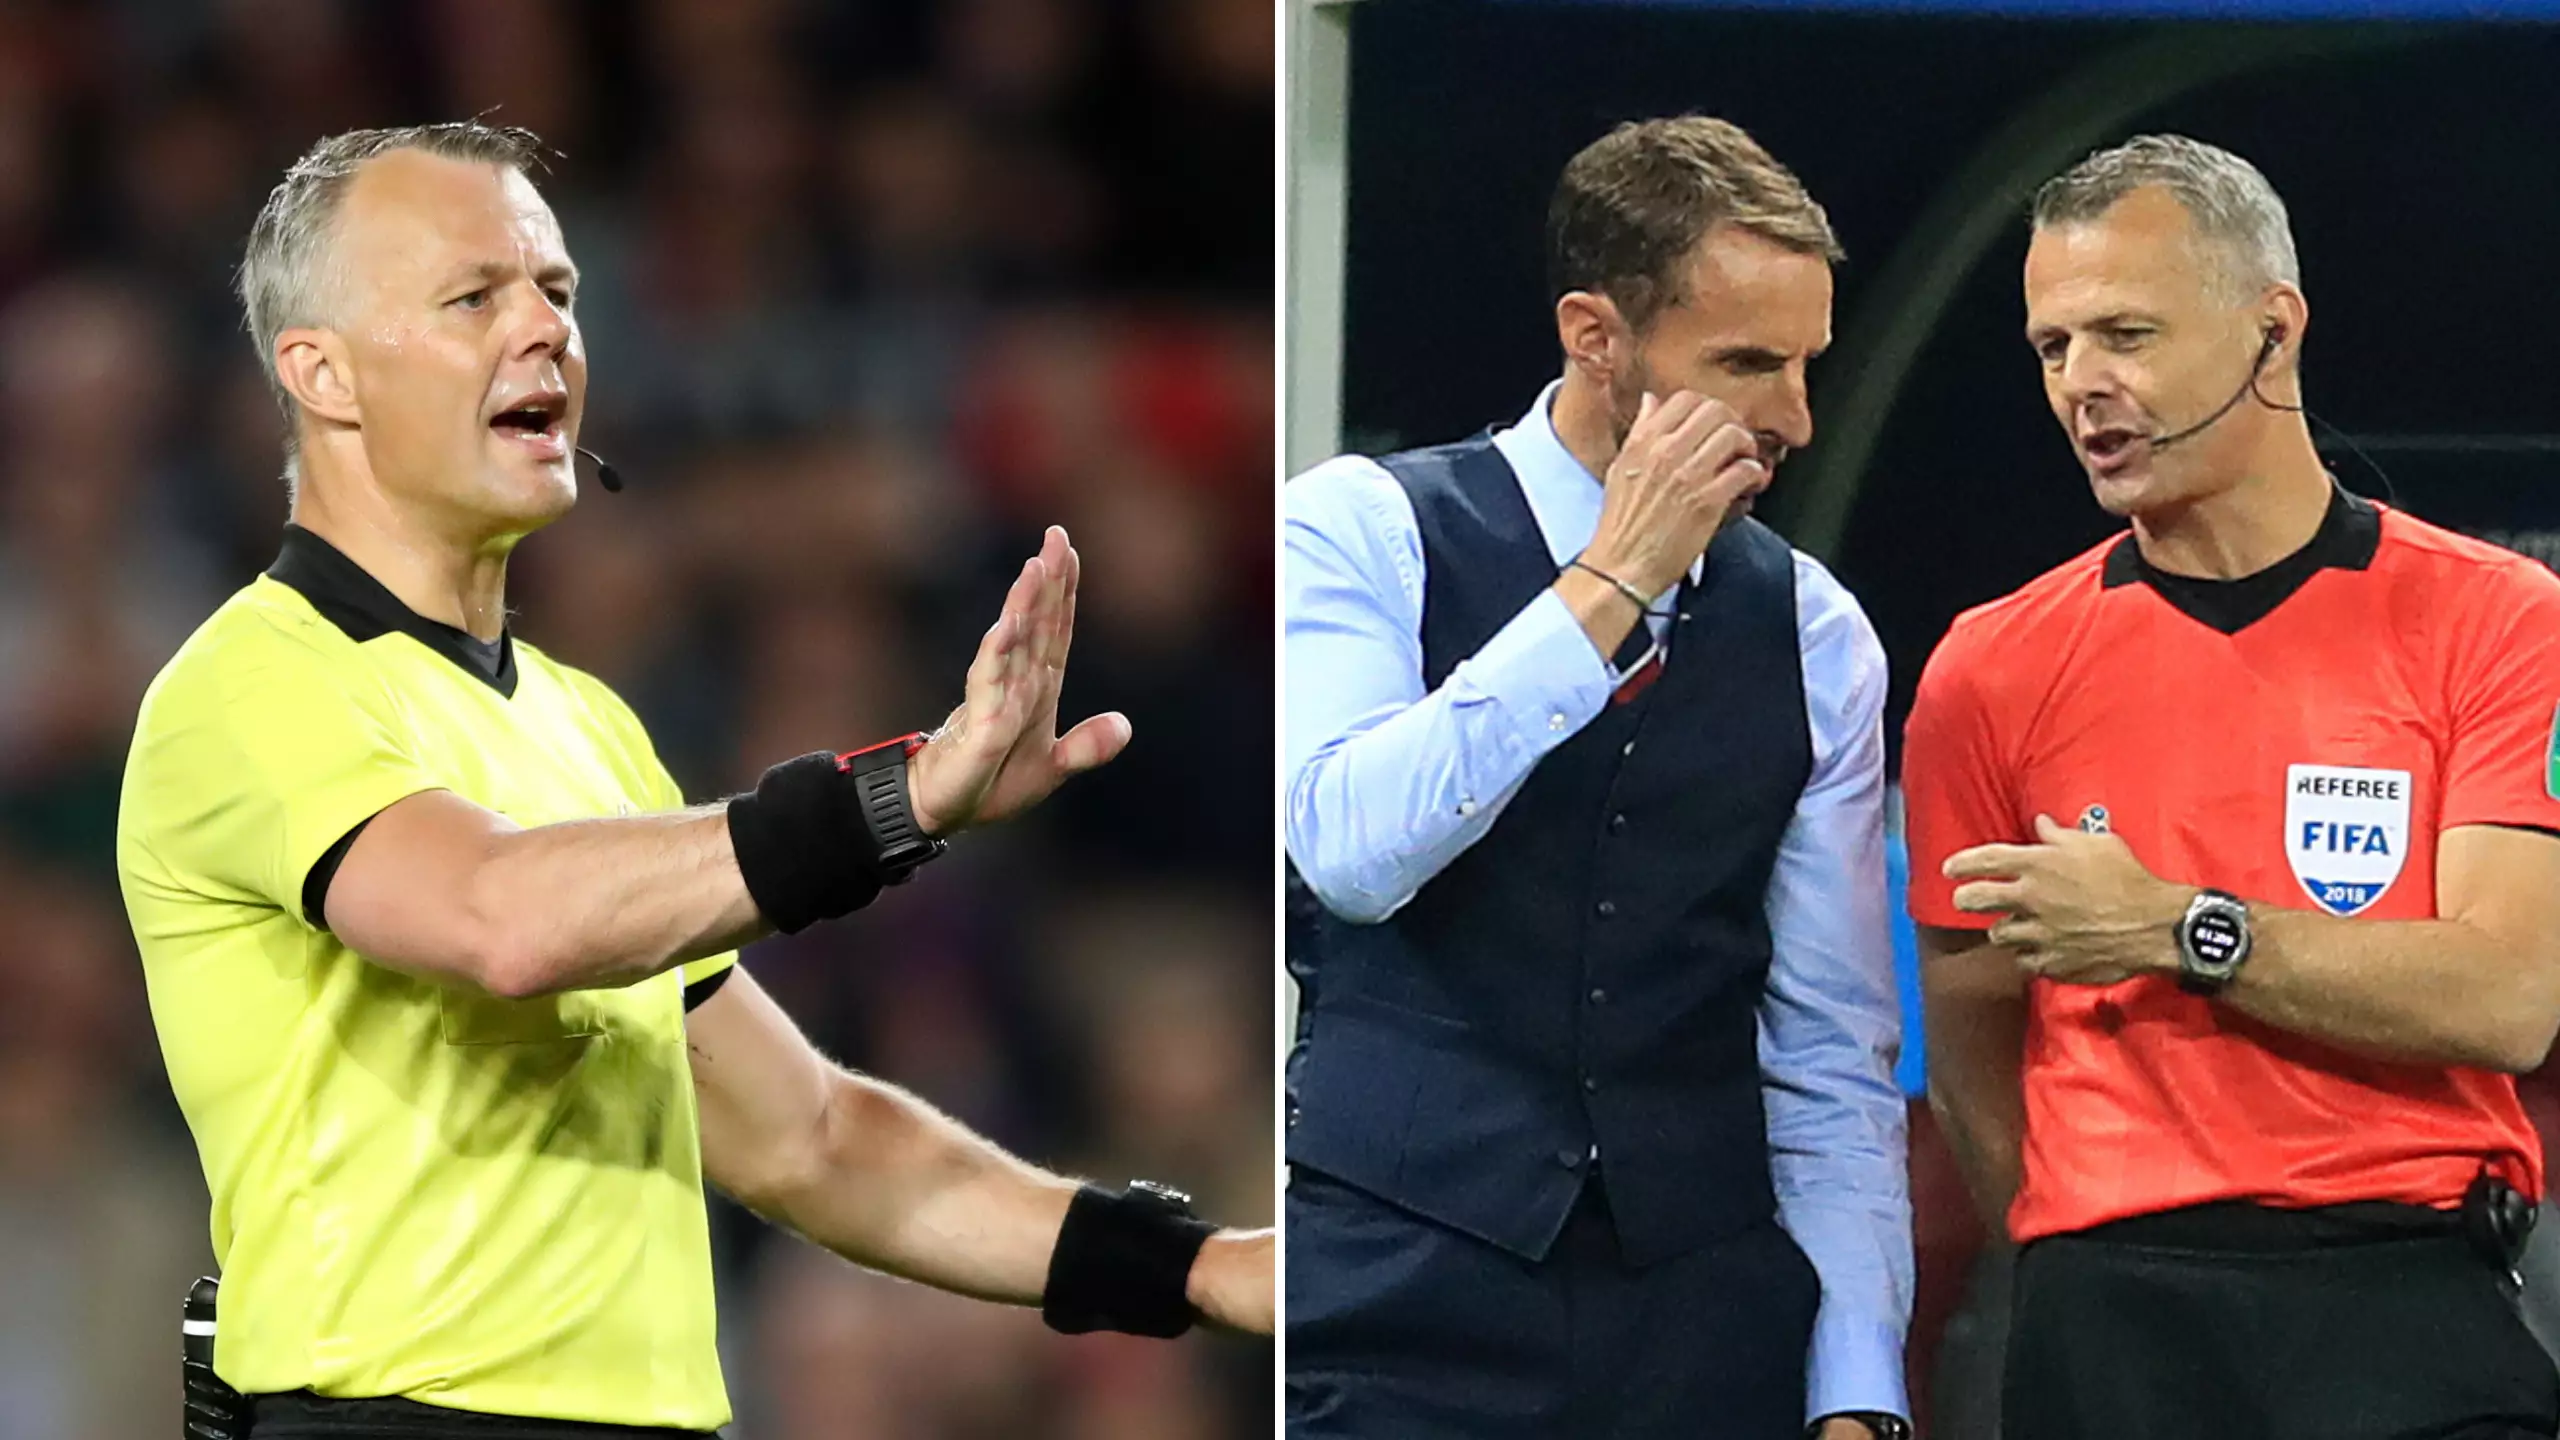 'The World's Richest Referee' Will Be In Charge Of England vs Italy And His Story Is So Bizarre